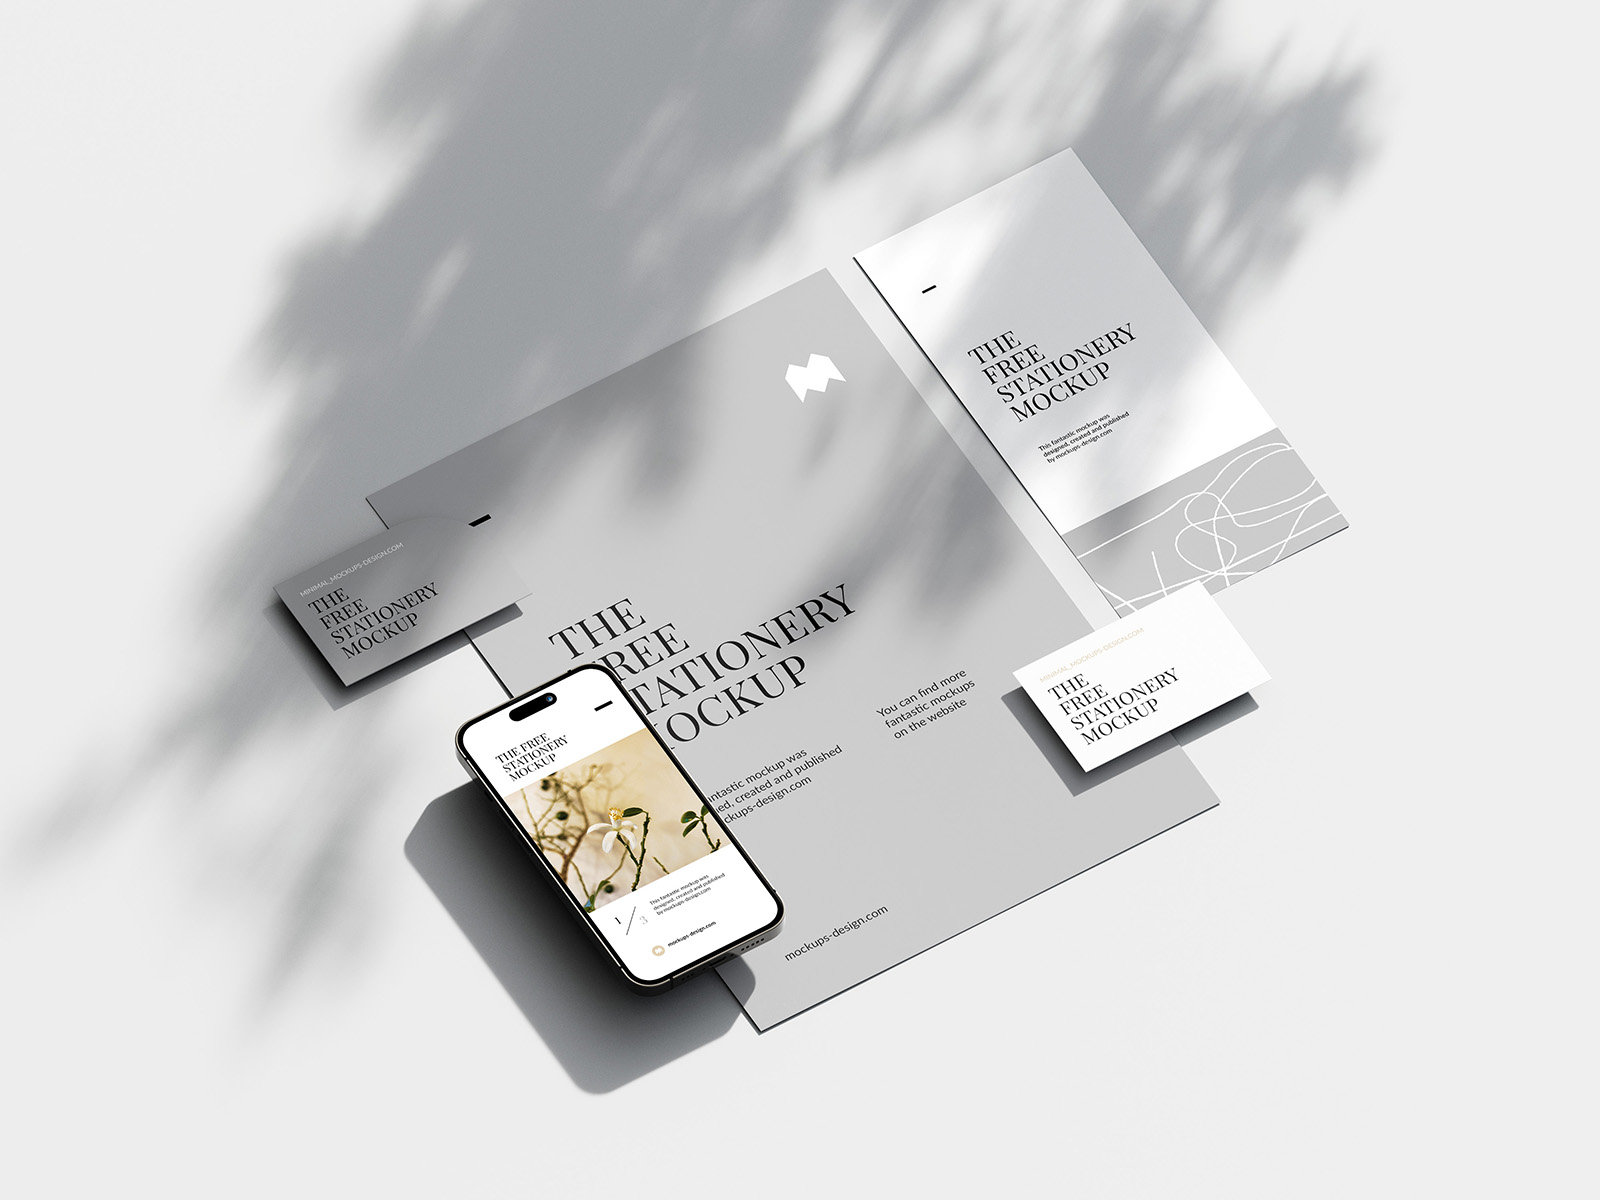 5 Shots of Mobile Mockup and Stationery with Natural Shadows FREE PSD